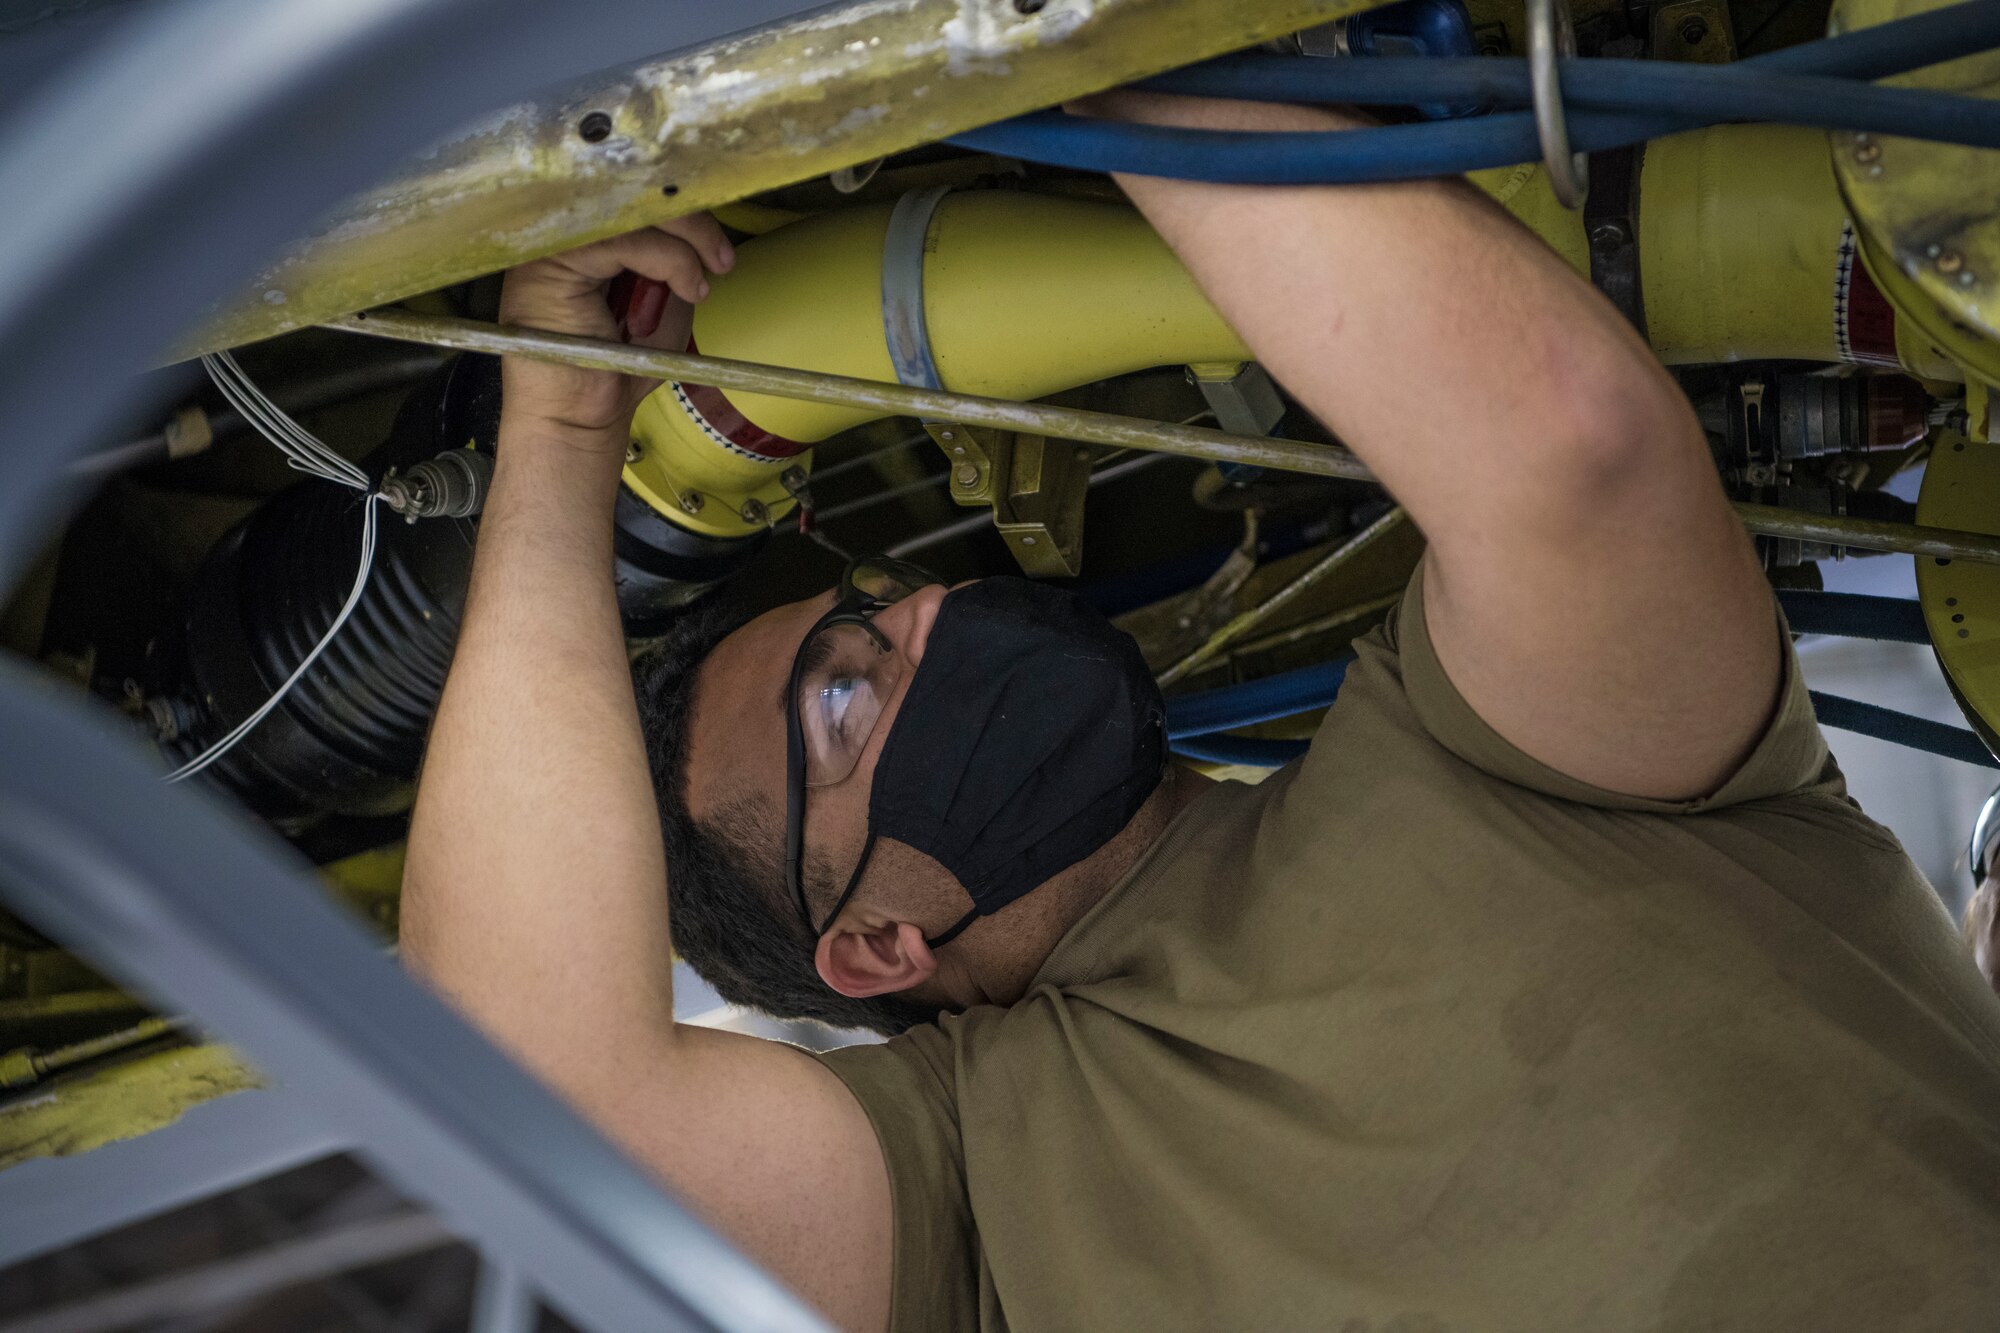 Staff Sgt. Jonah Rodriguez, 434thAircraft Maintenance Squadron hydraulic system technicians, repair the boom on a KC-135R Stratotanker, March 13, 2012, Grissom Air Reserve Base, Indiana. The KC-135R Stratotanker is responsible for mid-flight refueling and aiding the Air Force in its Global Reach and Global Power missions. (U.S. Air Force photo by Staff Sgt. Alexa Culbert)